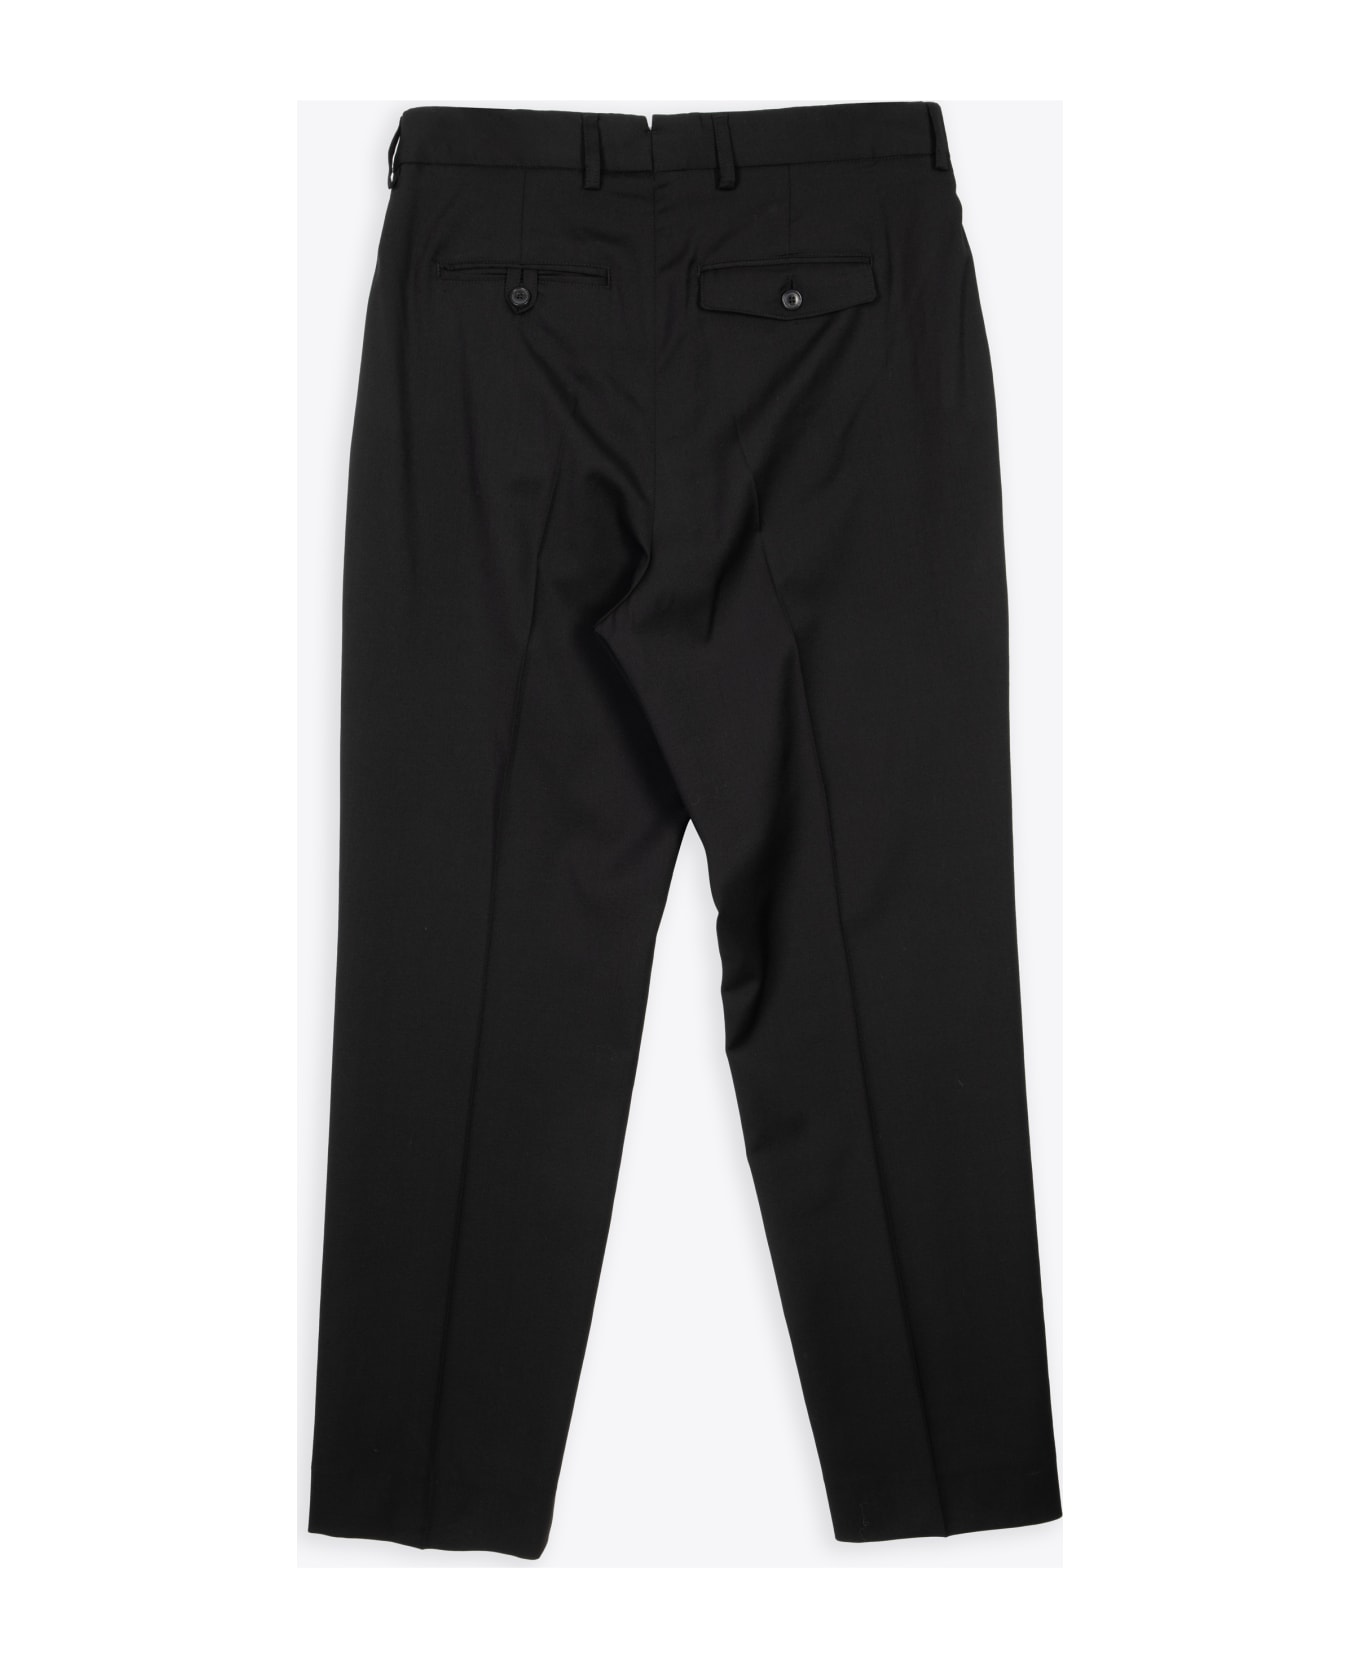 Our Legacy Chino 22 Black wool tailored pant - Chino 22 - Nero